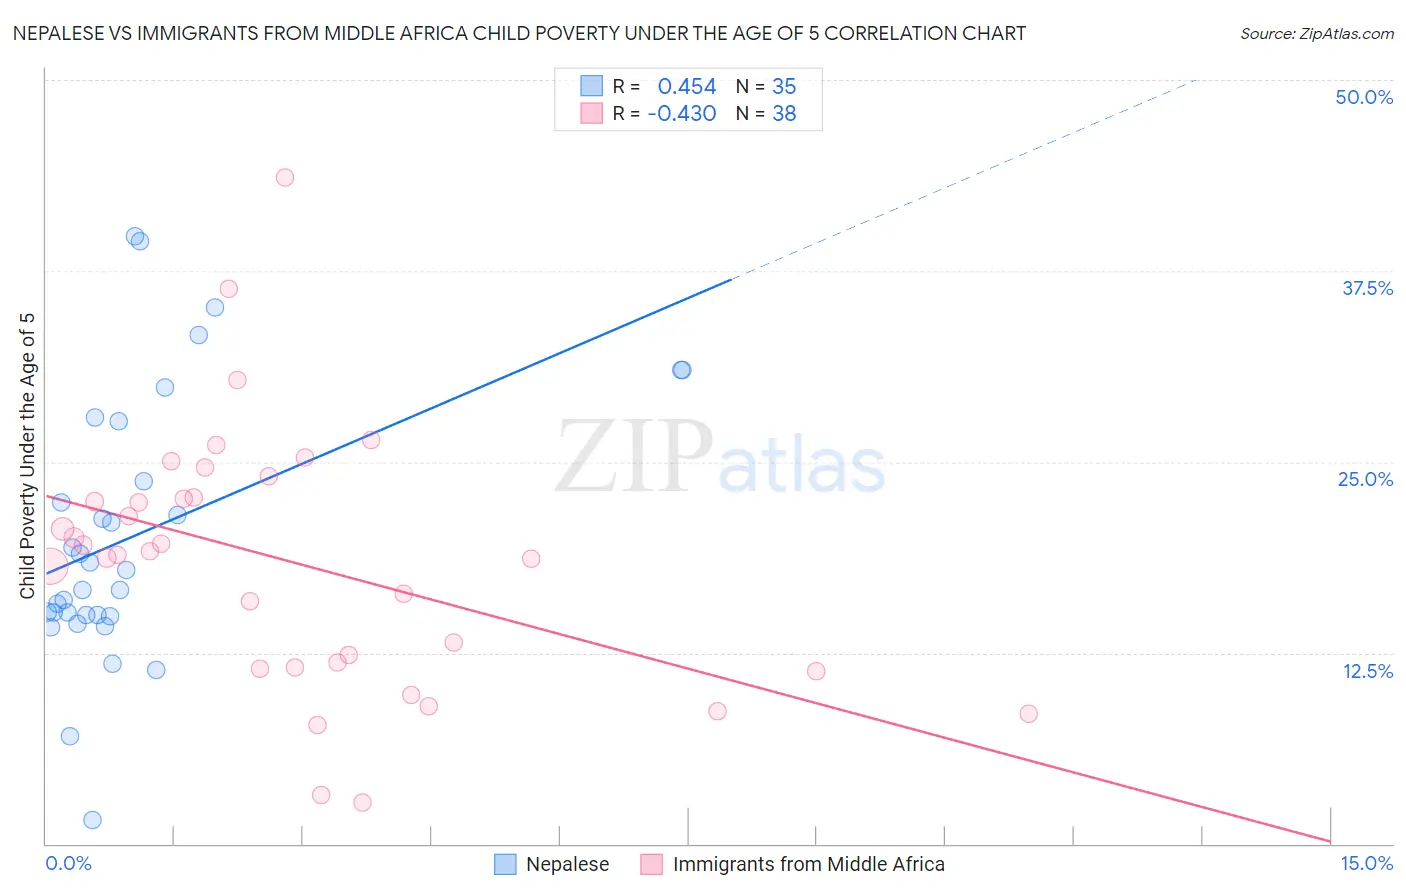 Nepalese vs Immigrants from Middle Africa Child Poverty Under the Age of 5